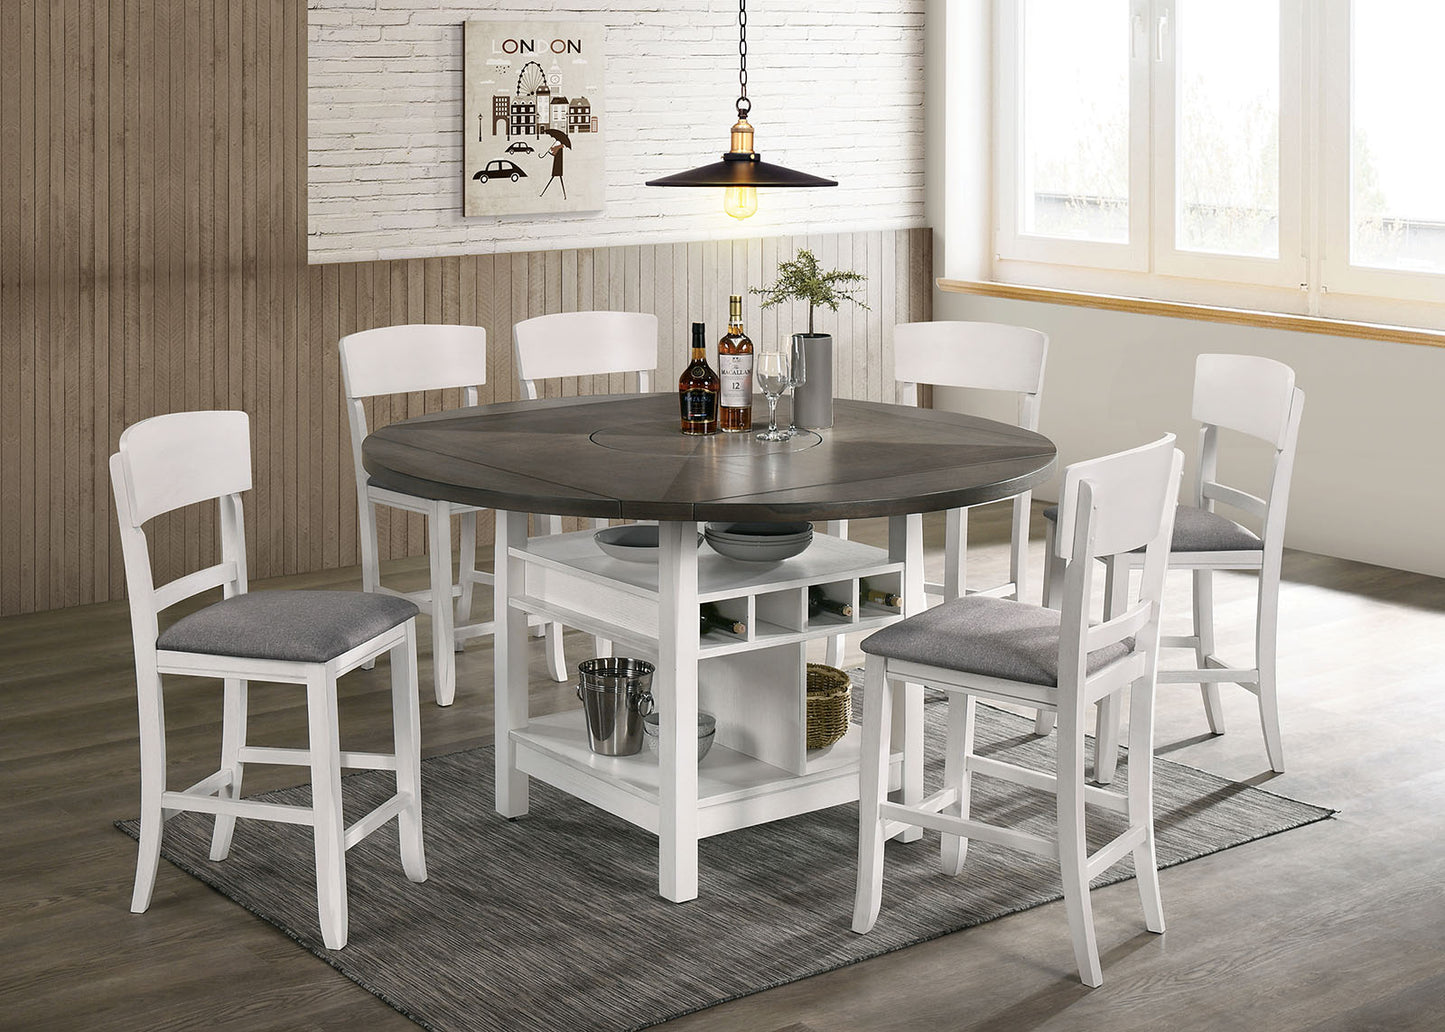 Furniture of America STACIE 5 PC. Dining Table Set